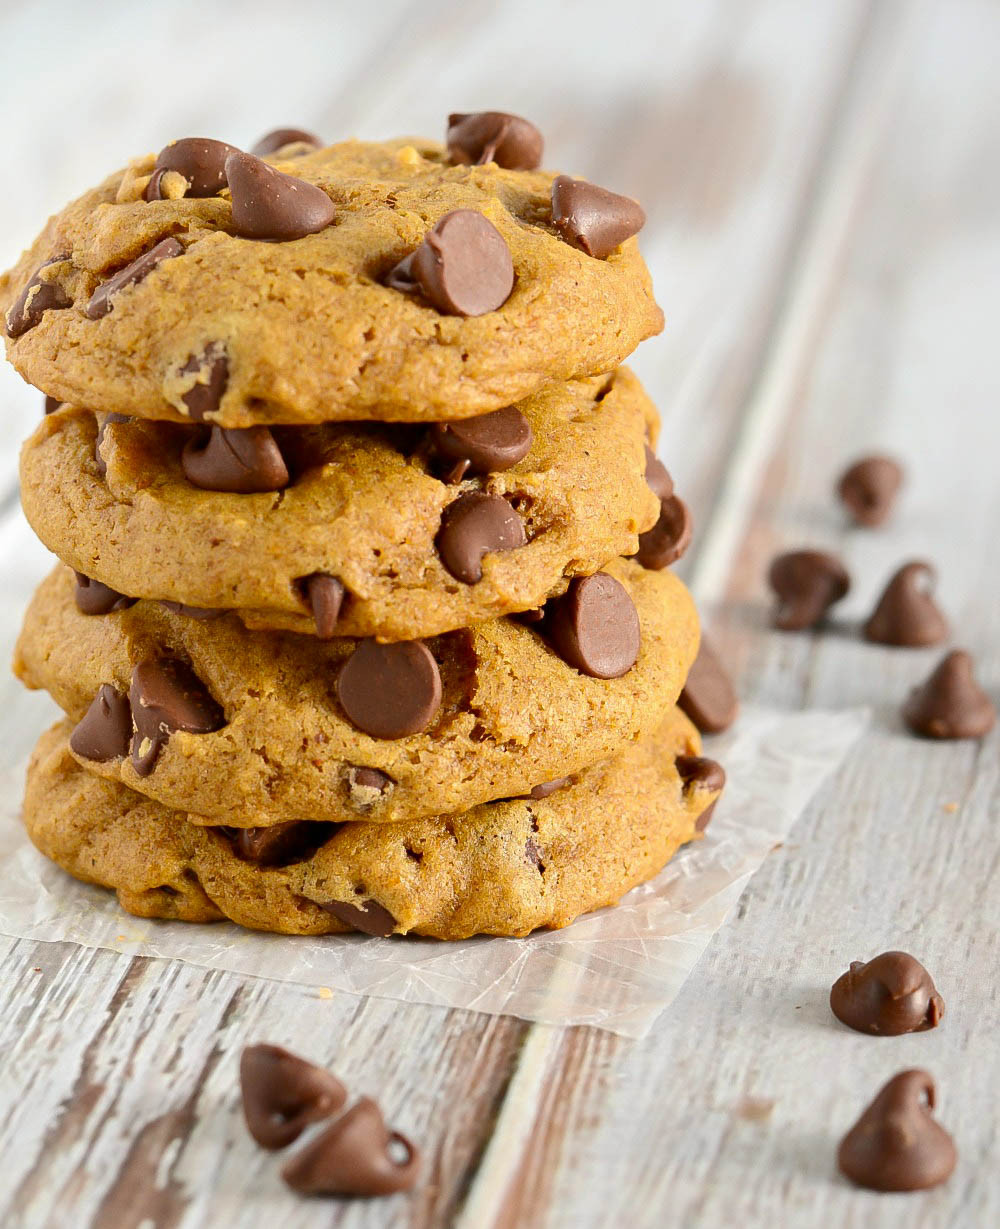 Easy Pumpkin Chocolate Chip Cookies
 How to Make Pumpkin Chocolate Chip Cookies Easy & Fluffy